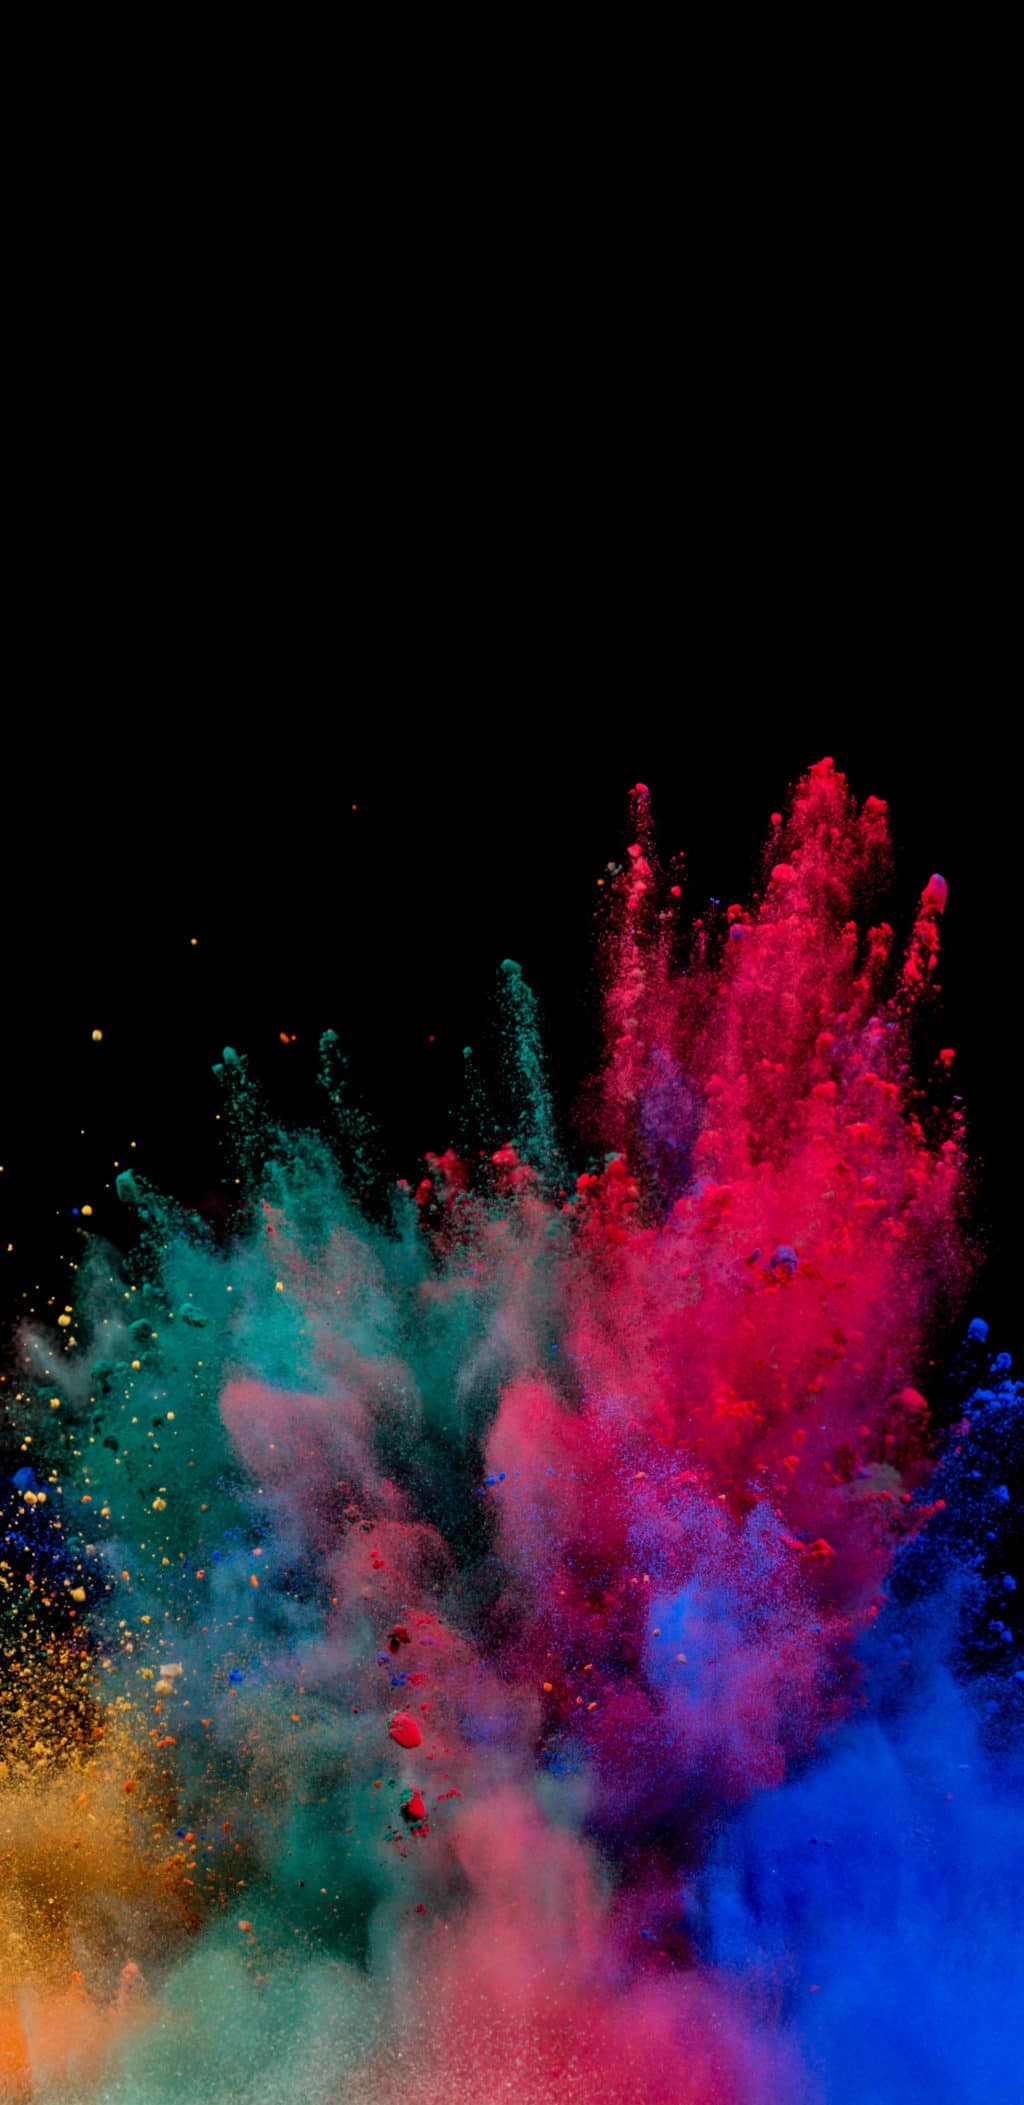 Amoled Mobile Wallpapers, HD Amoled Backgrounds, Free Images Download